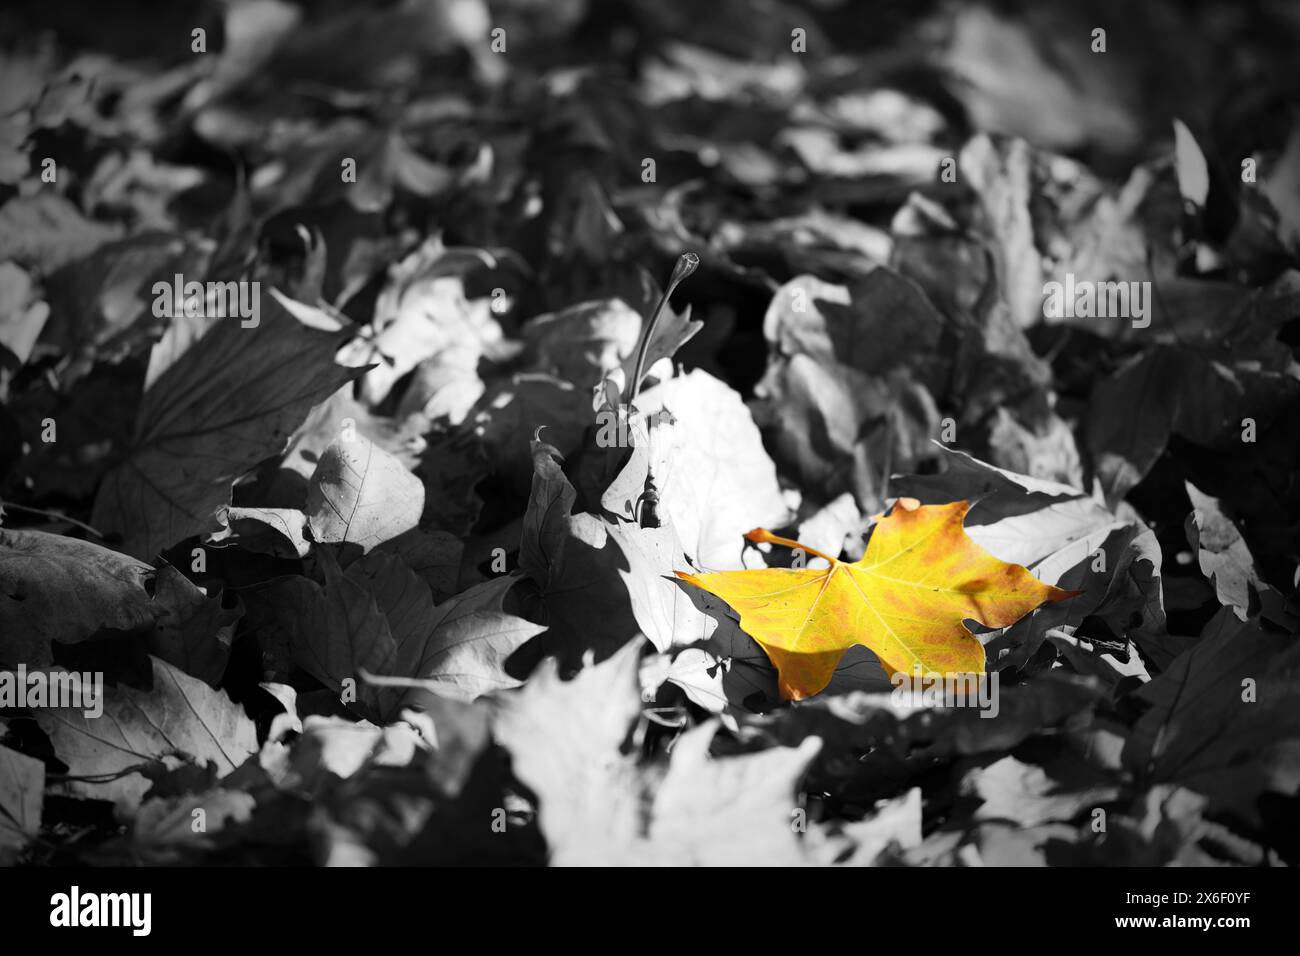 A single golden leaf isolated and in focus among a pile of black and white fallen autumn or fall leaves. A nostalgic or romantic concept for seasons Stock Photo